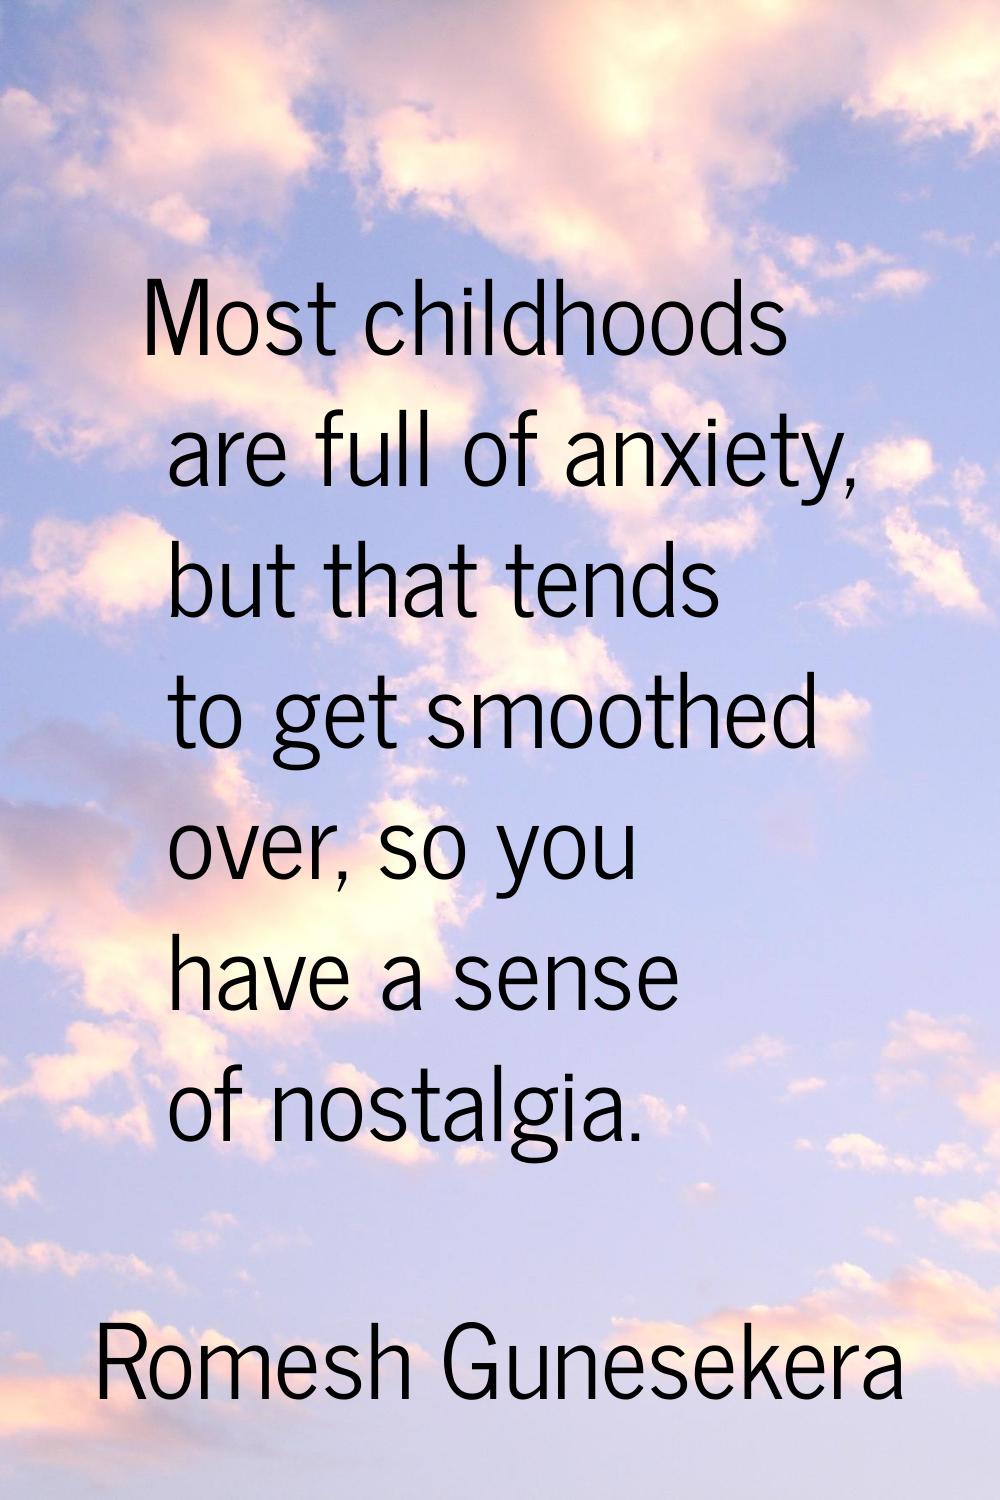 Most childhoods are full of anxiety, but that tends to get smoothed over, so you have a sense of no